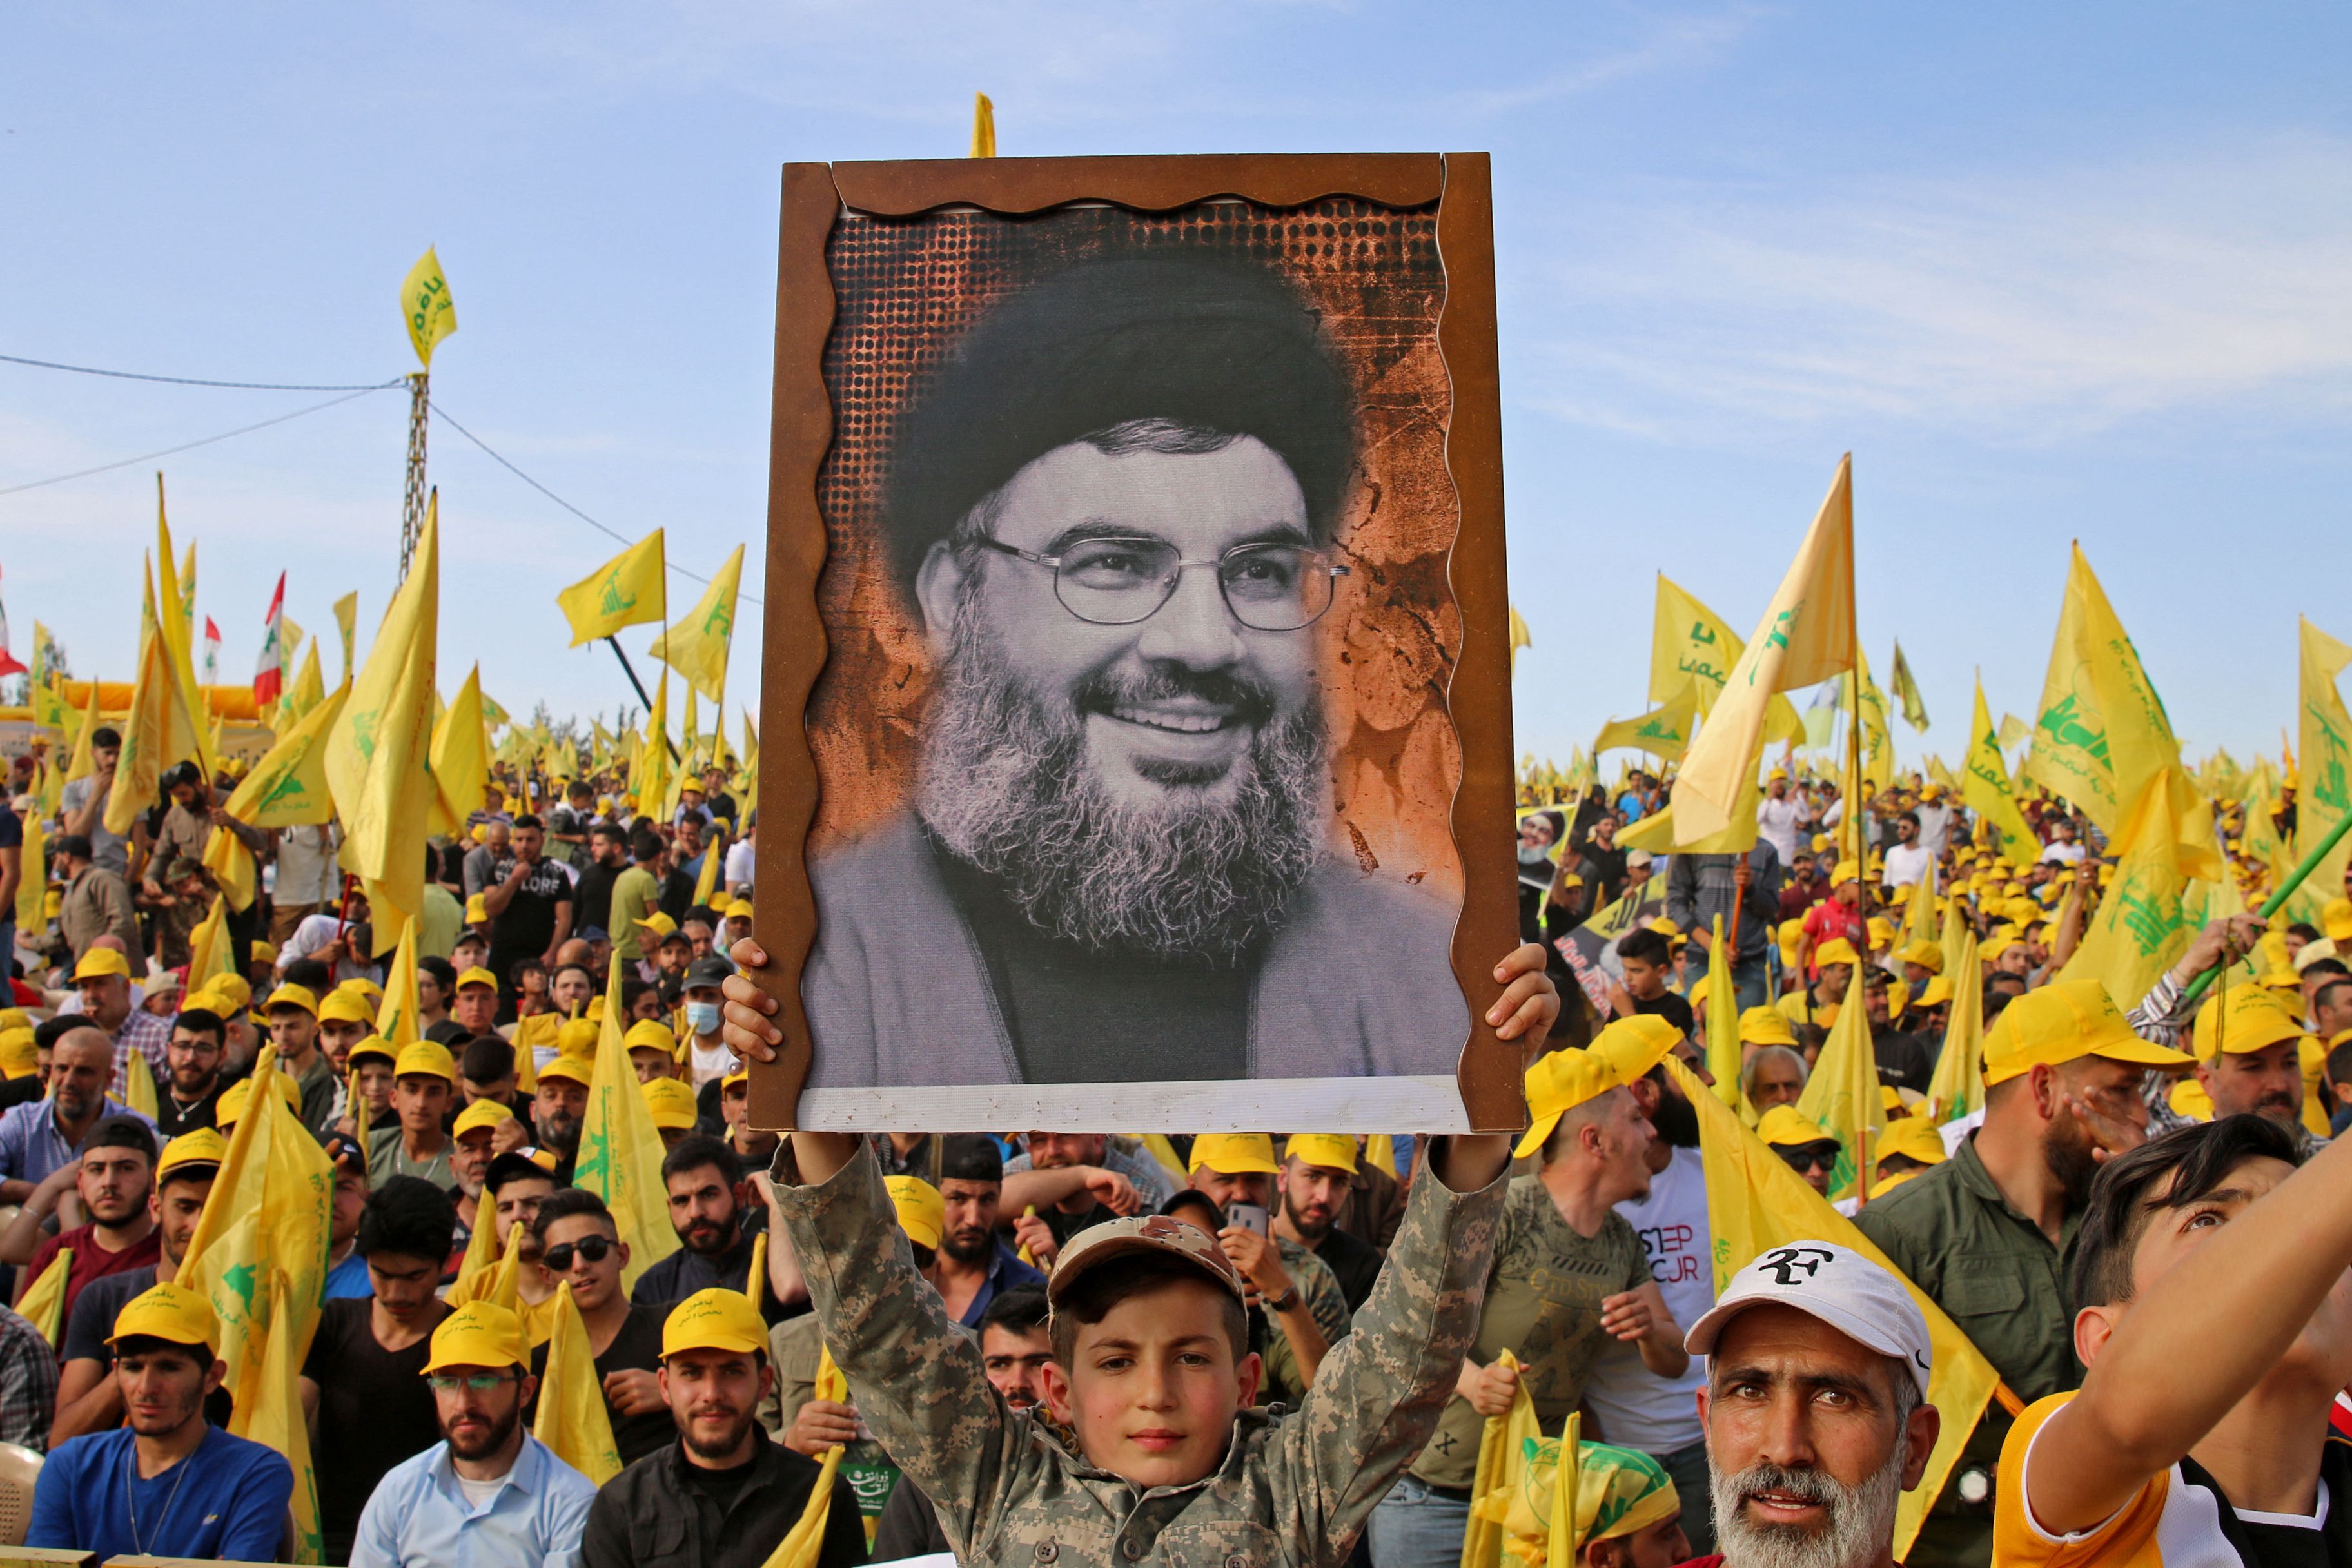 Bright yellow and green flags — Hezbollah’s colors — sprout from a sea of jubilant faces packed closely together. In the foreground, a young boy in fatigues raises a black-and-white photo of Nasrallah almost as big as he is above his head. In the image, Nasrallah, in glasses and a large beard, smiles in a fatherly way.